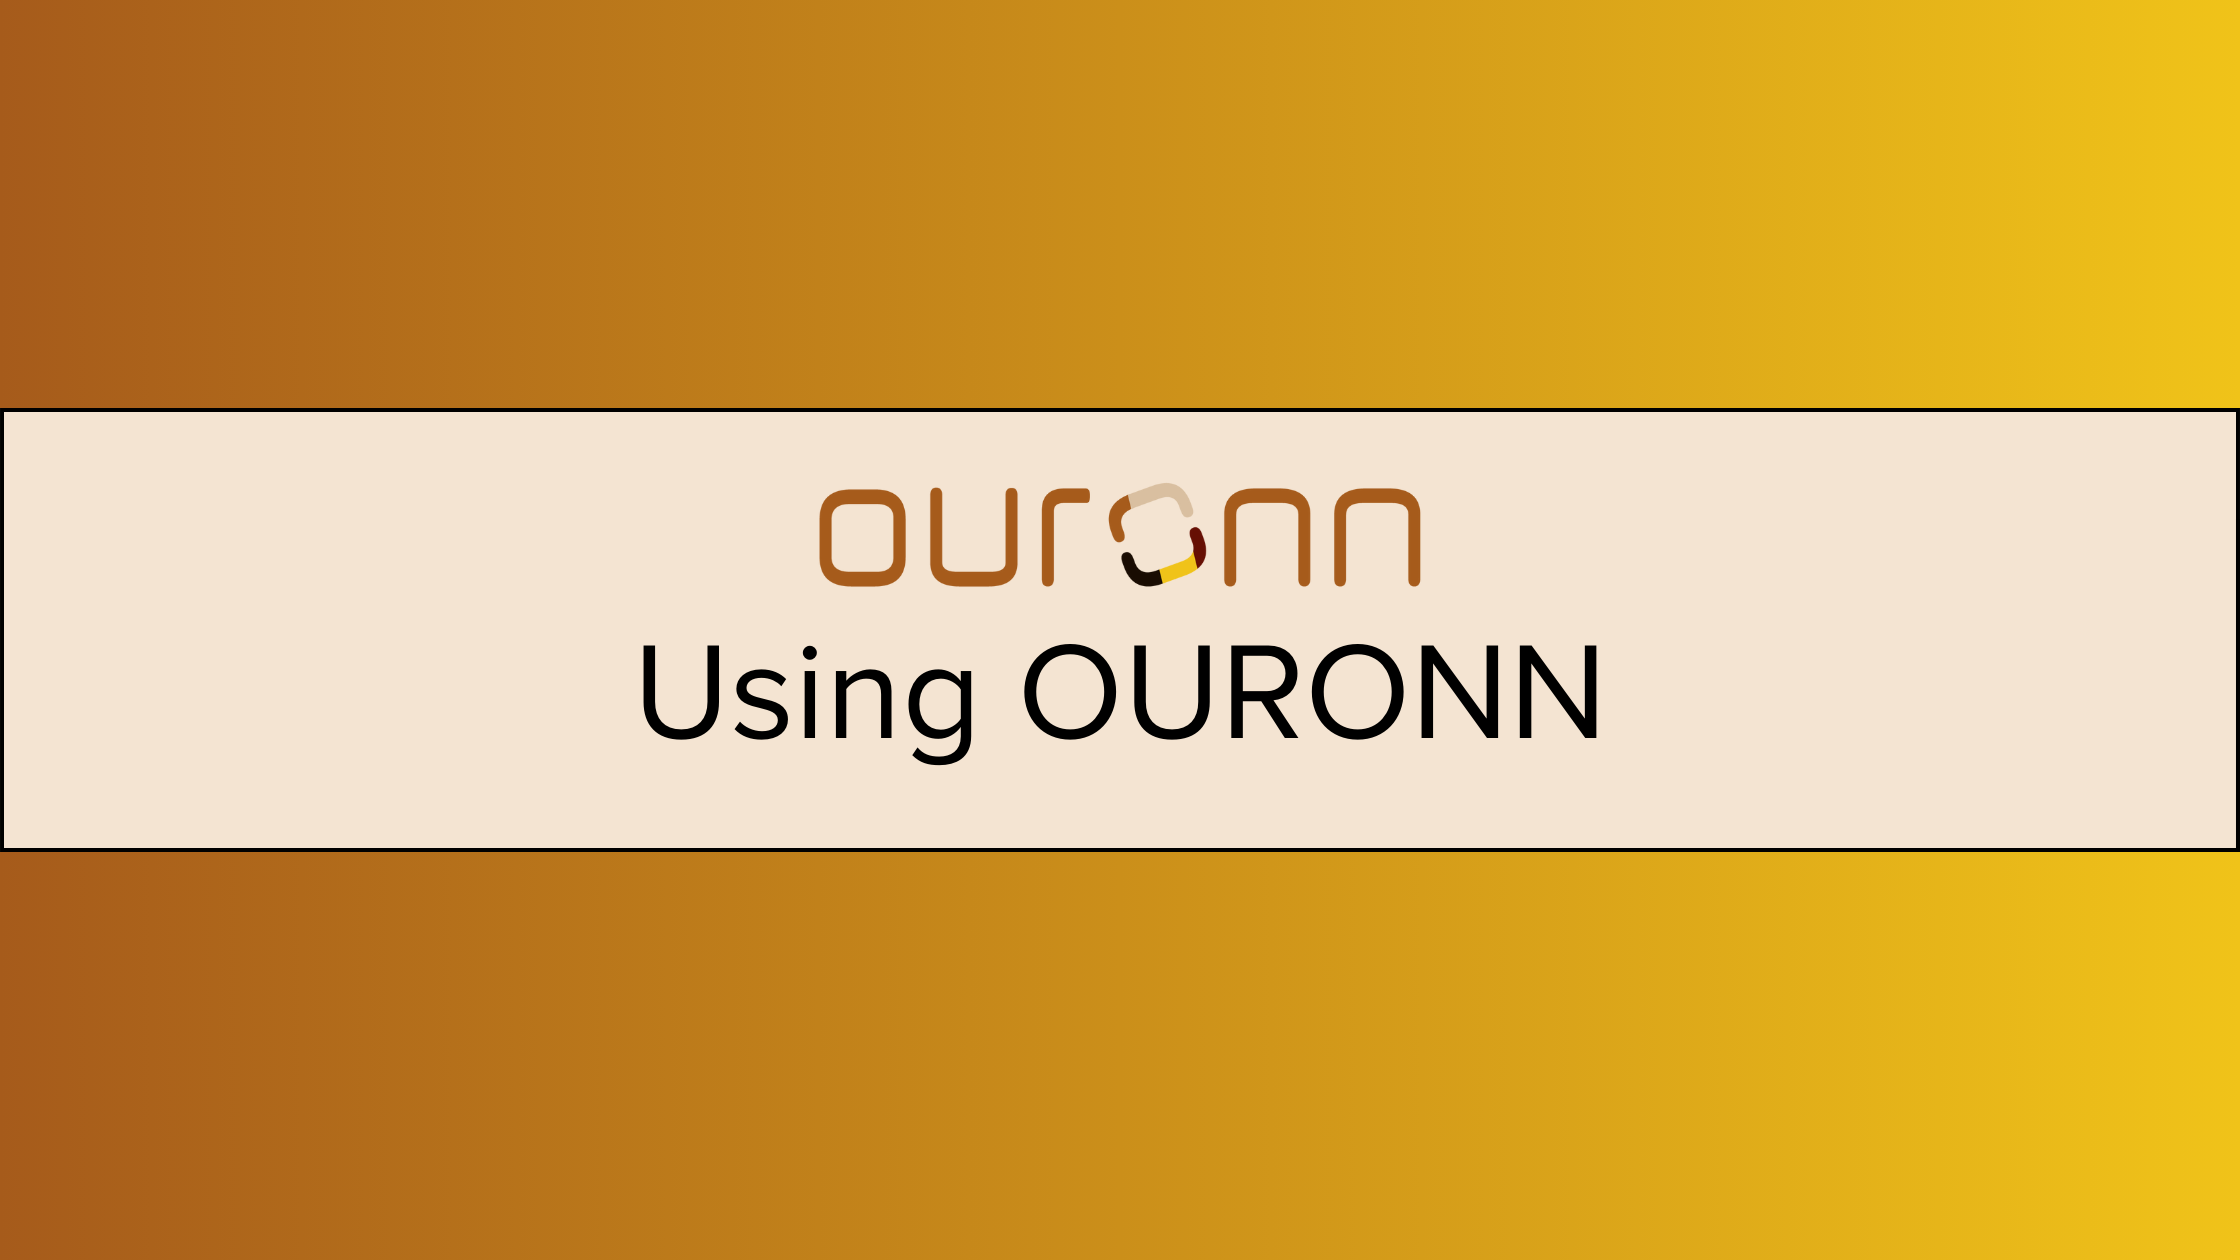 "Using OURONN" Cover Image